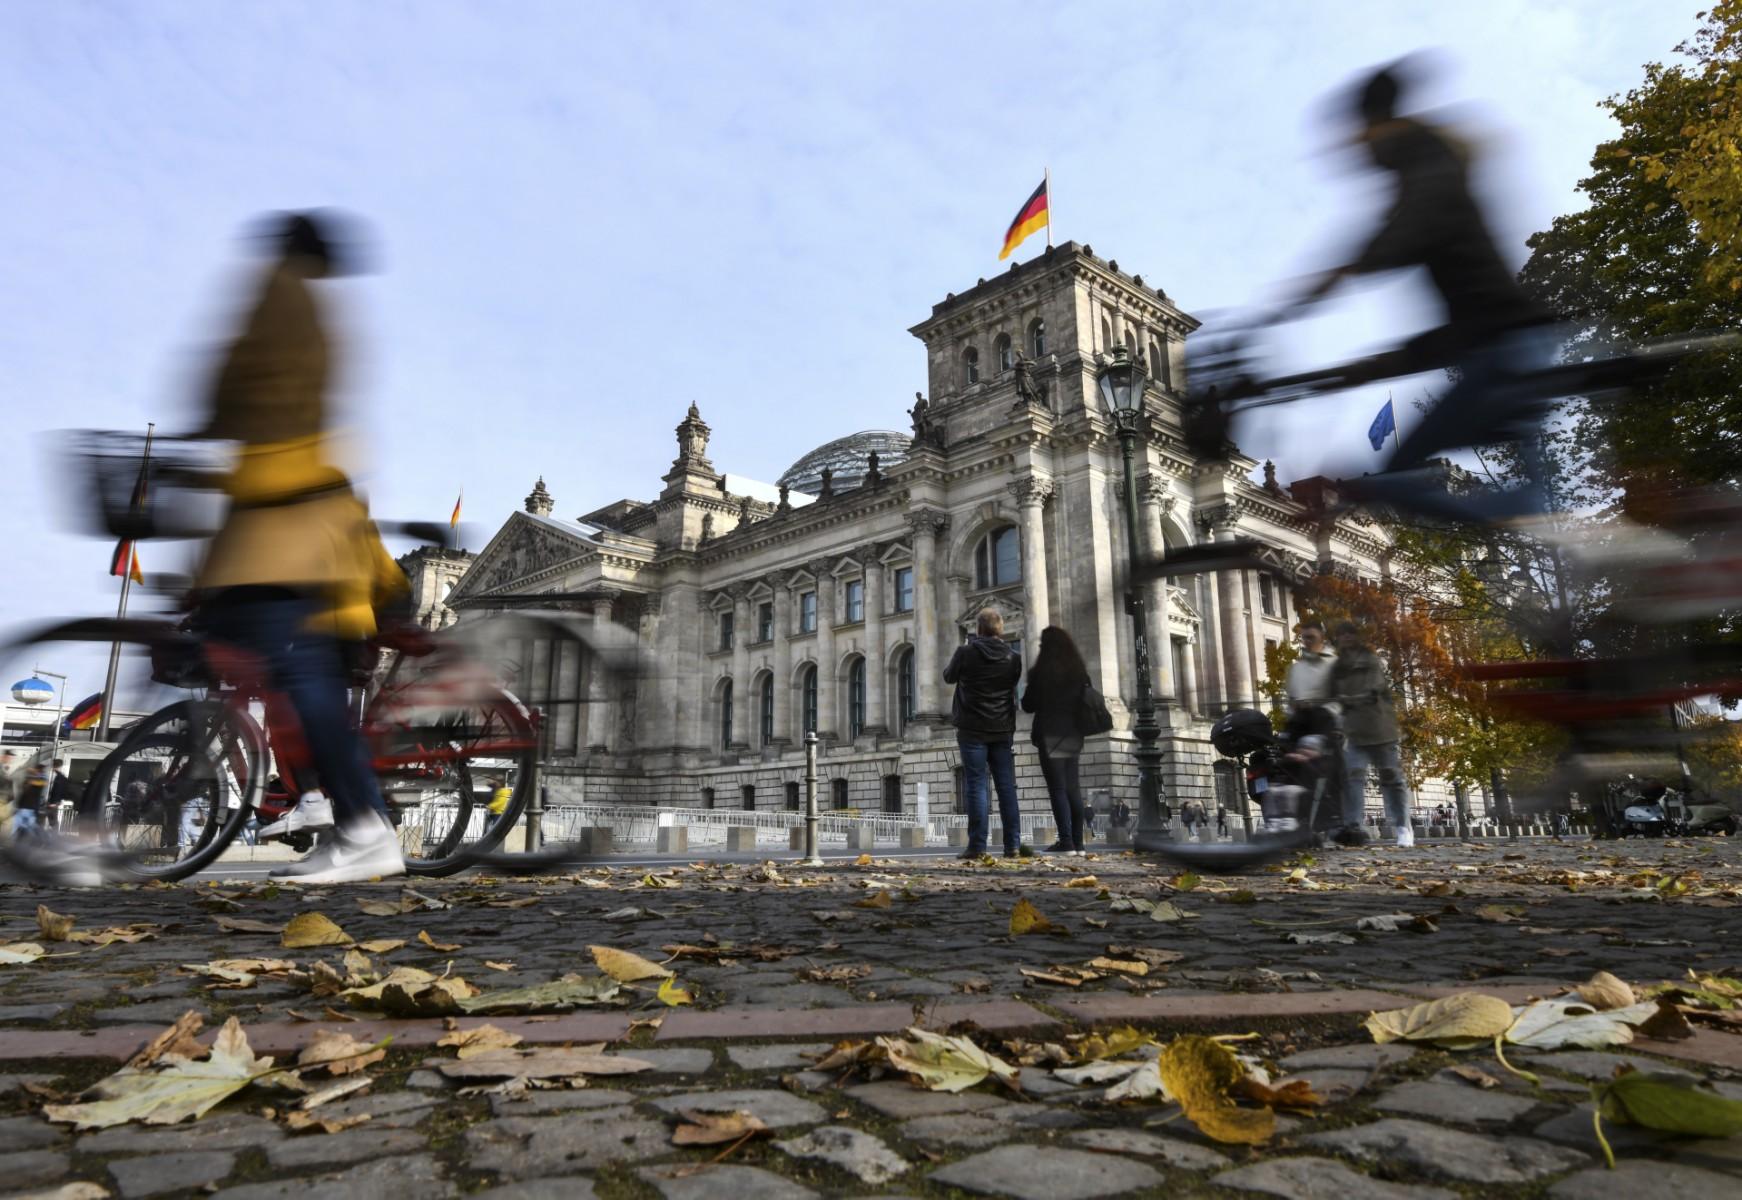 Leaves lay on the ground as pedestrians and bicycle riders are seen in front of the Reichstag building housing the lower house of parliament Bundestag in Berlin, Germany, on Oct 19, 2021. Photo: AFP